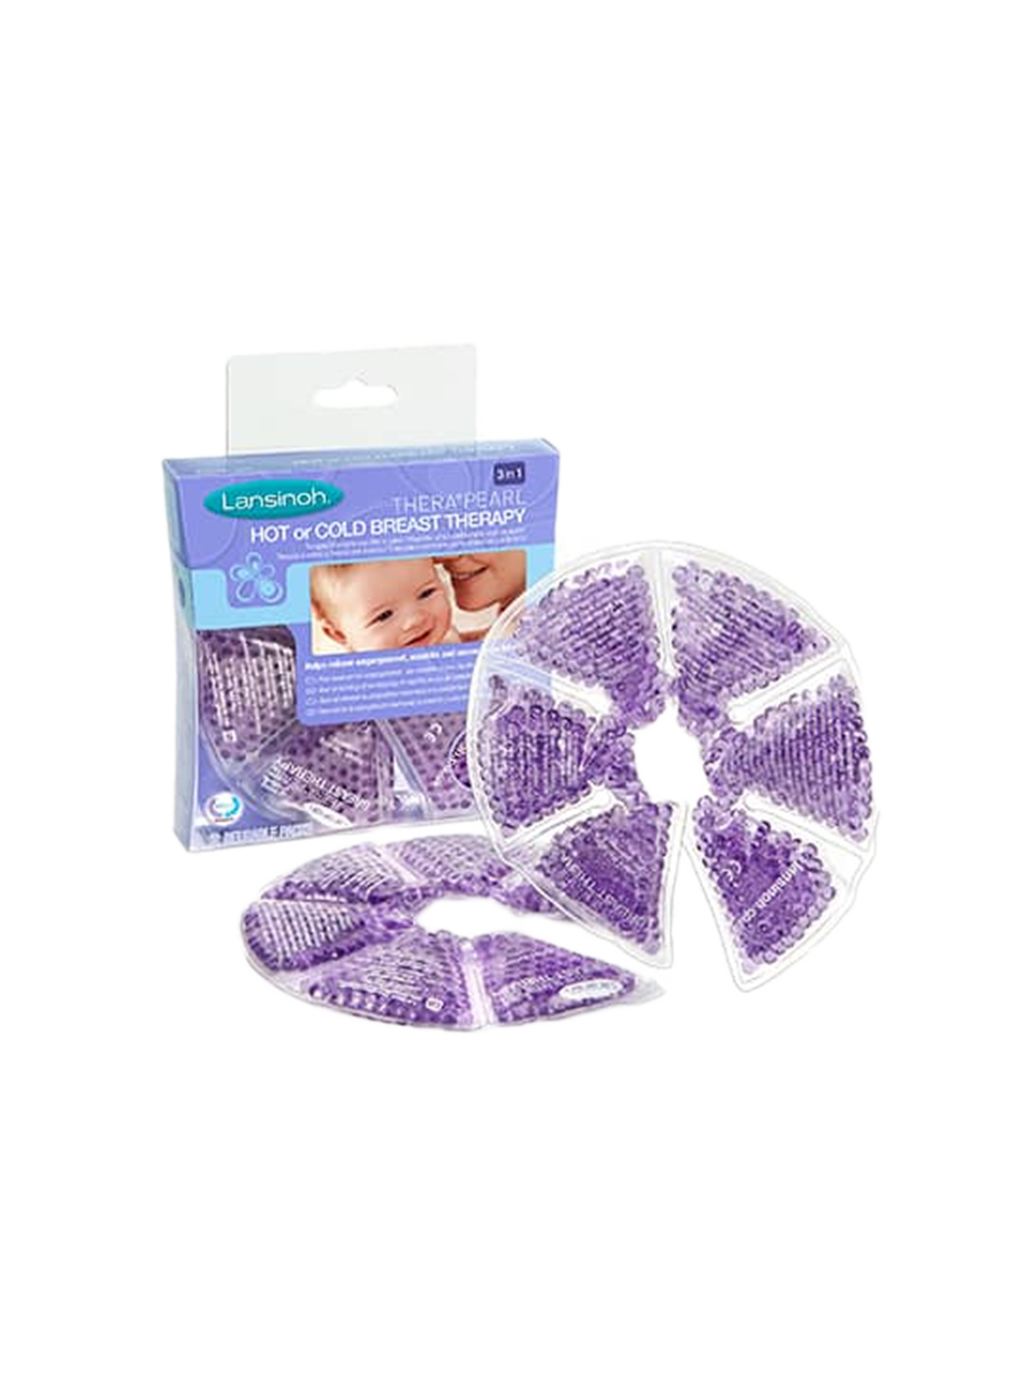 Gel compresses on the Therapearl® 3-in-1 breasts